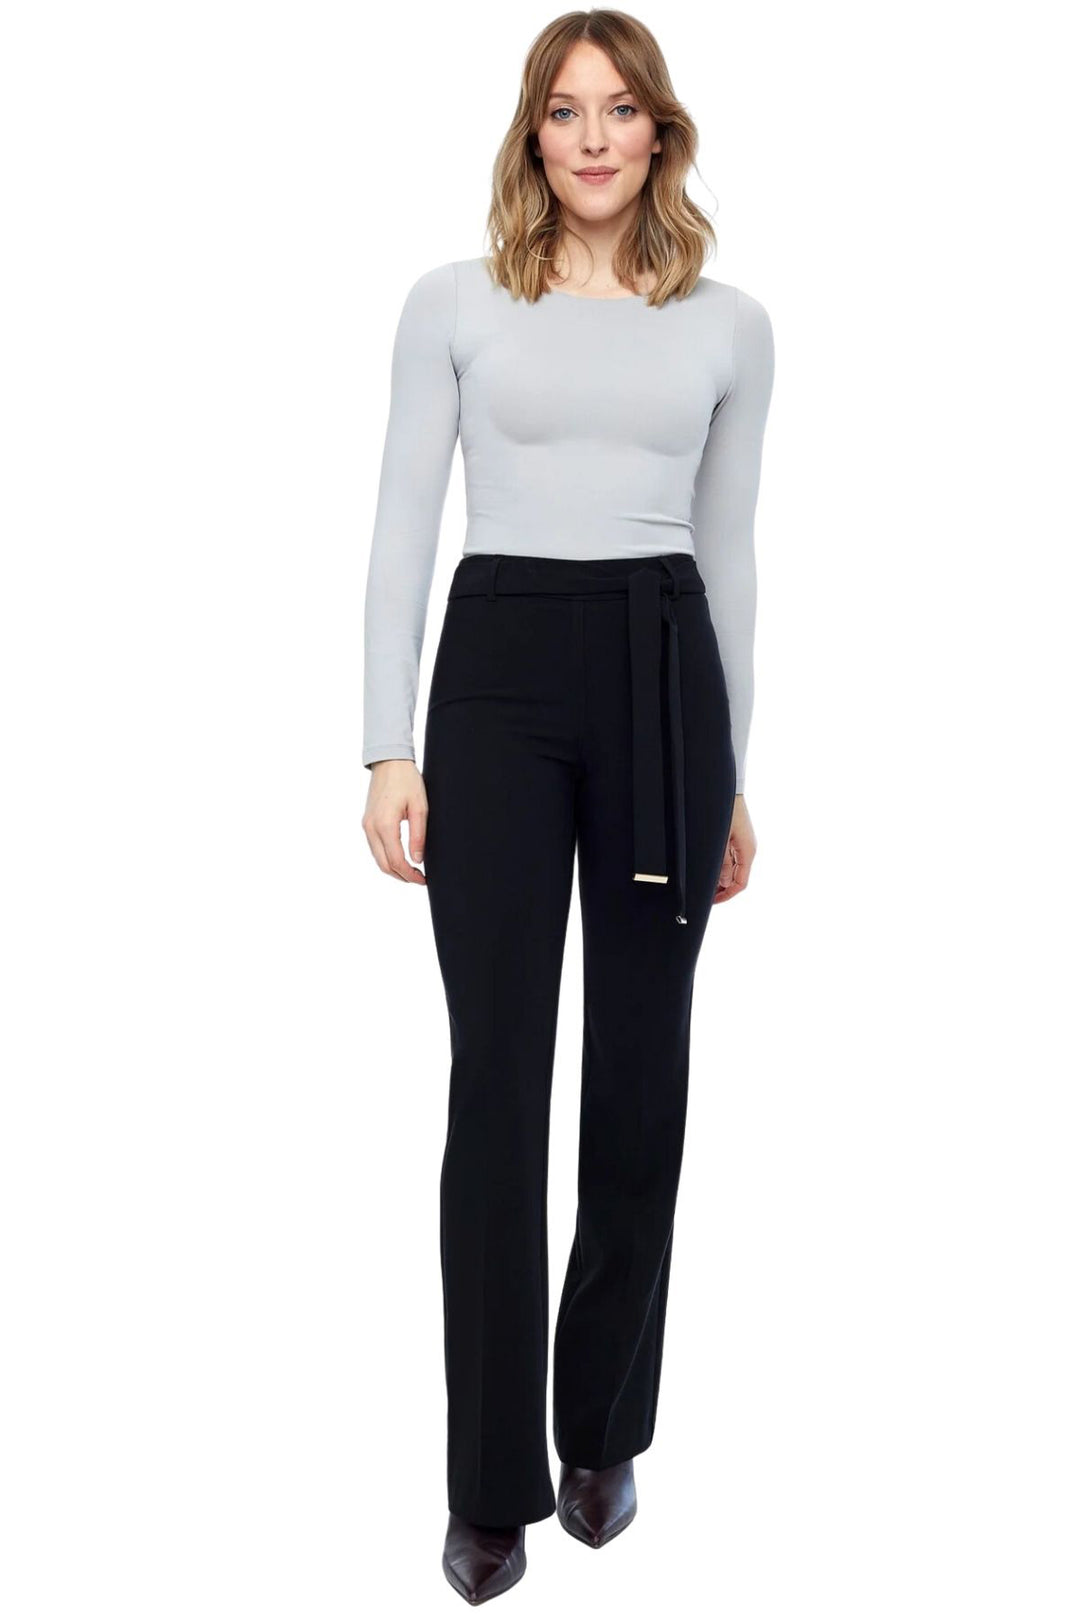 Perfectly tailored the Palermo Bootcut Pant by Up! is all about sophistication and elegance. With its tailored aesthetic and featuring a slip on tummy control waistband these pants are flattering and comfortable. Featuring a removable belt sash, with a classic full length makes these pants timeless and on trend.  Brand : Up! Style Code : 67591 UP Women’s body-shaping bootcut pant Pull-on elastic waistband Built-in tummy control Slim bootcut fit Full length Tailored leg pleats Removable belt sash